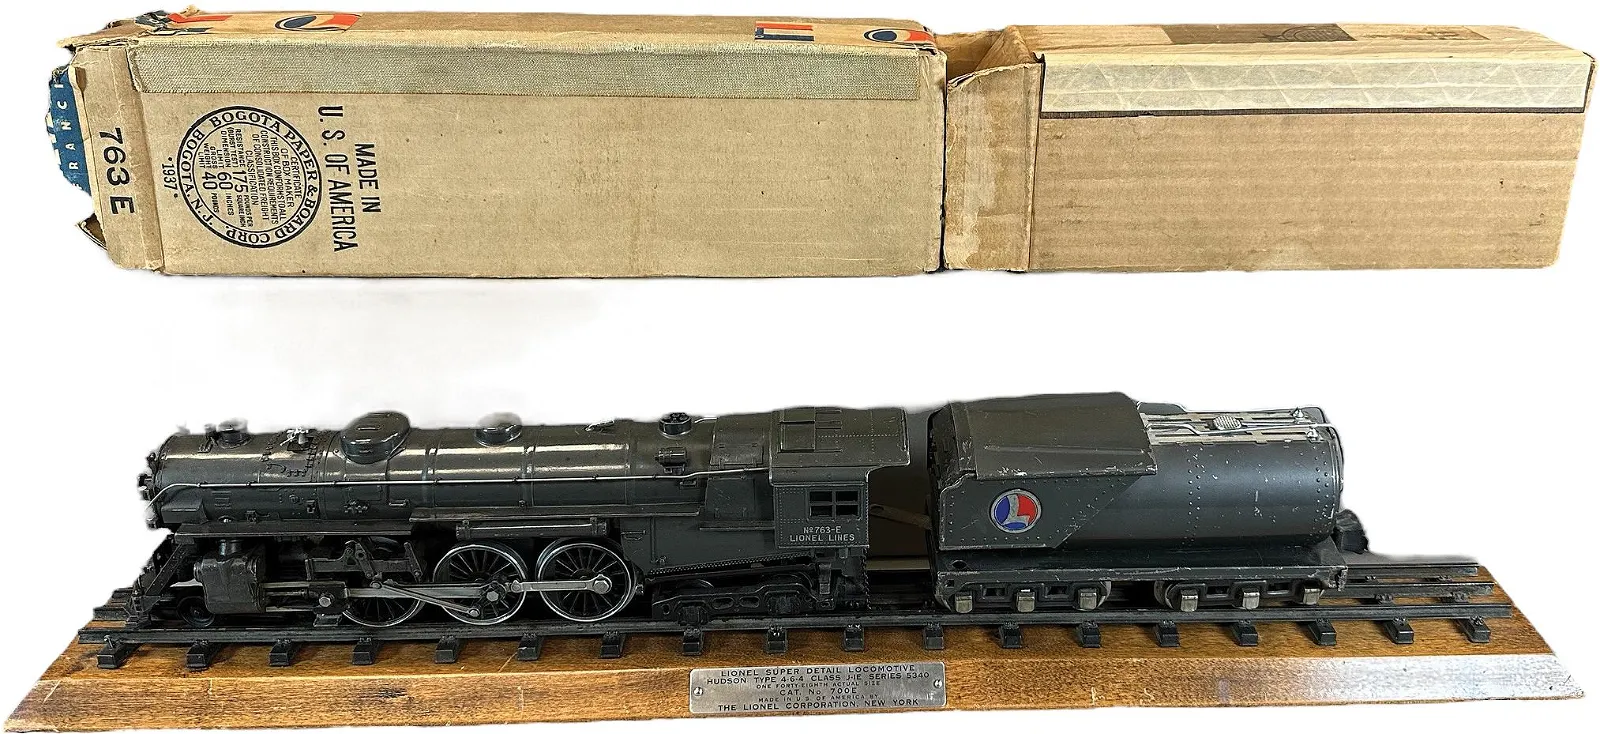 Boxed Lionel 763E Hudson with display board, estimated at $1,000-$1,500, sold for $2,750.